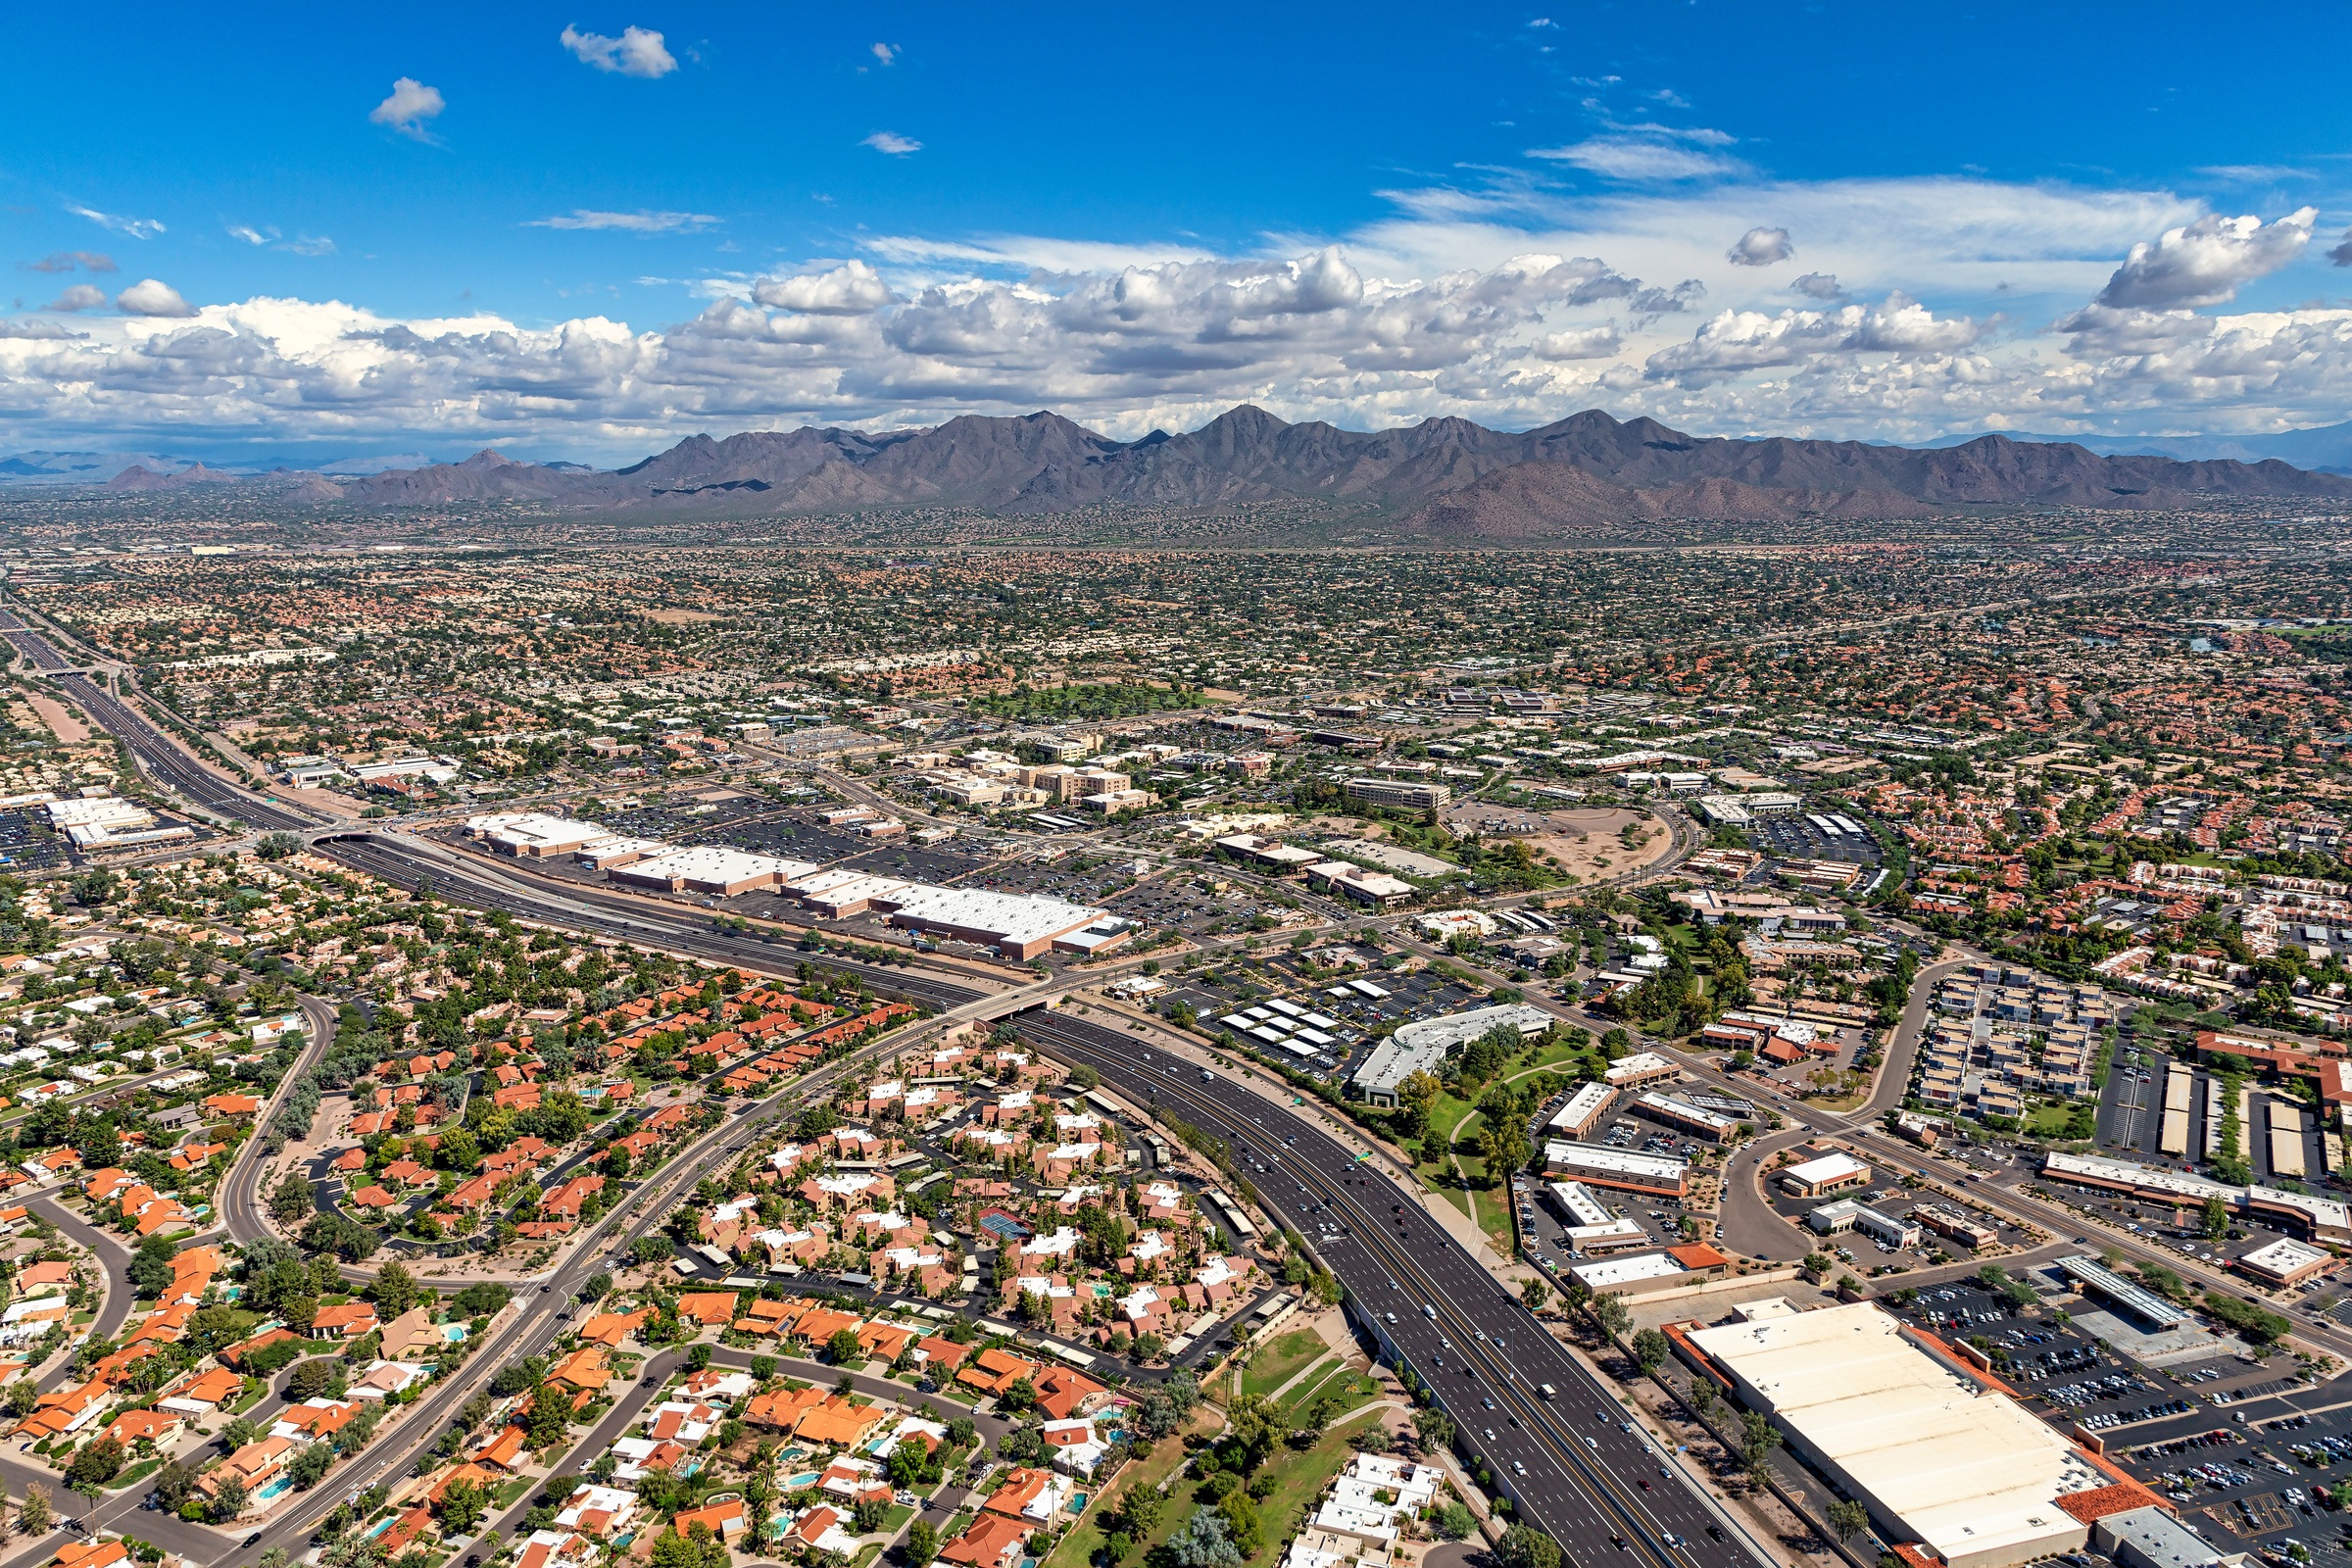 McDowell Mountains in Scottsdale, Arizona from above the Loop 101 freeway looking to the northeast